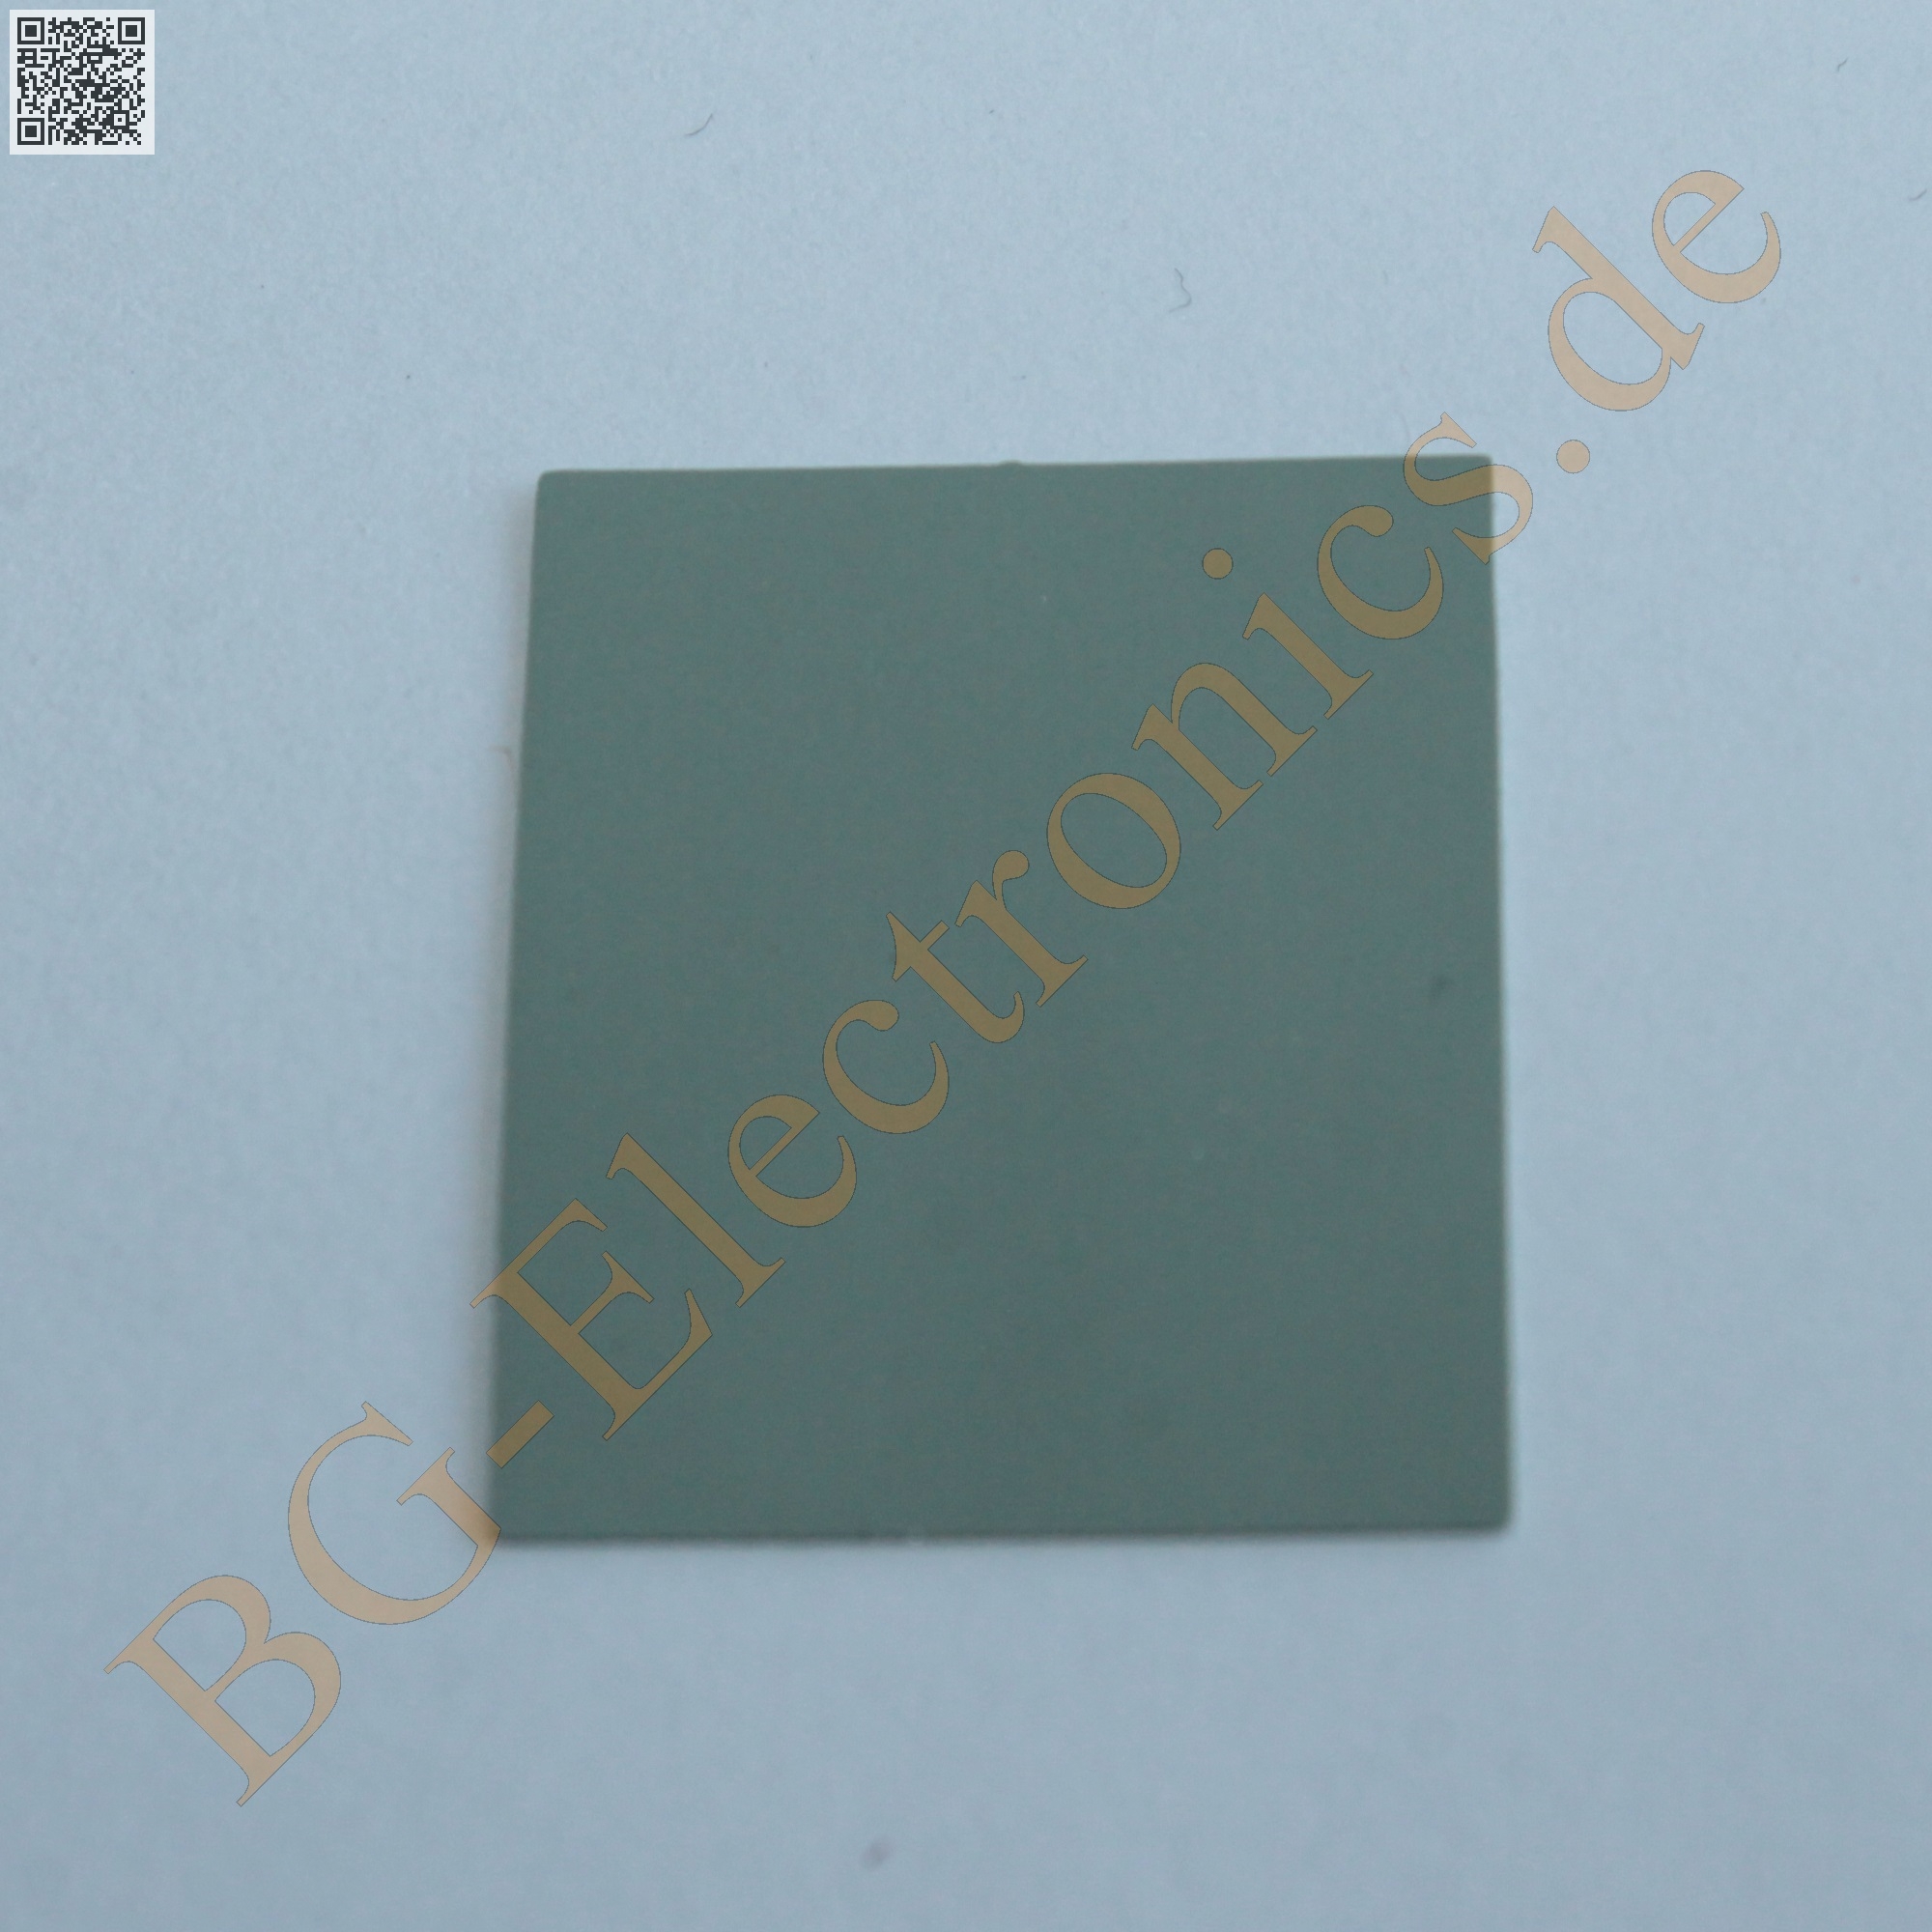 Insulatingfoil for TO-3PF